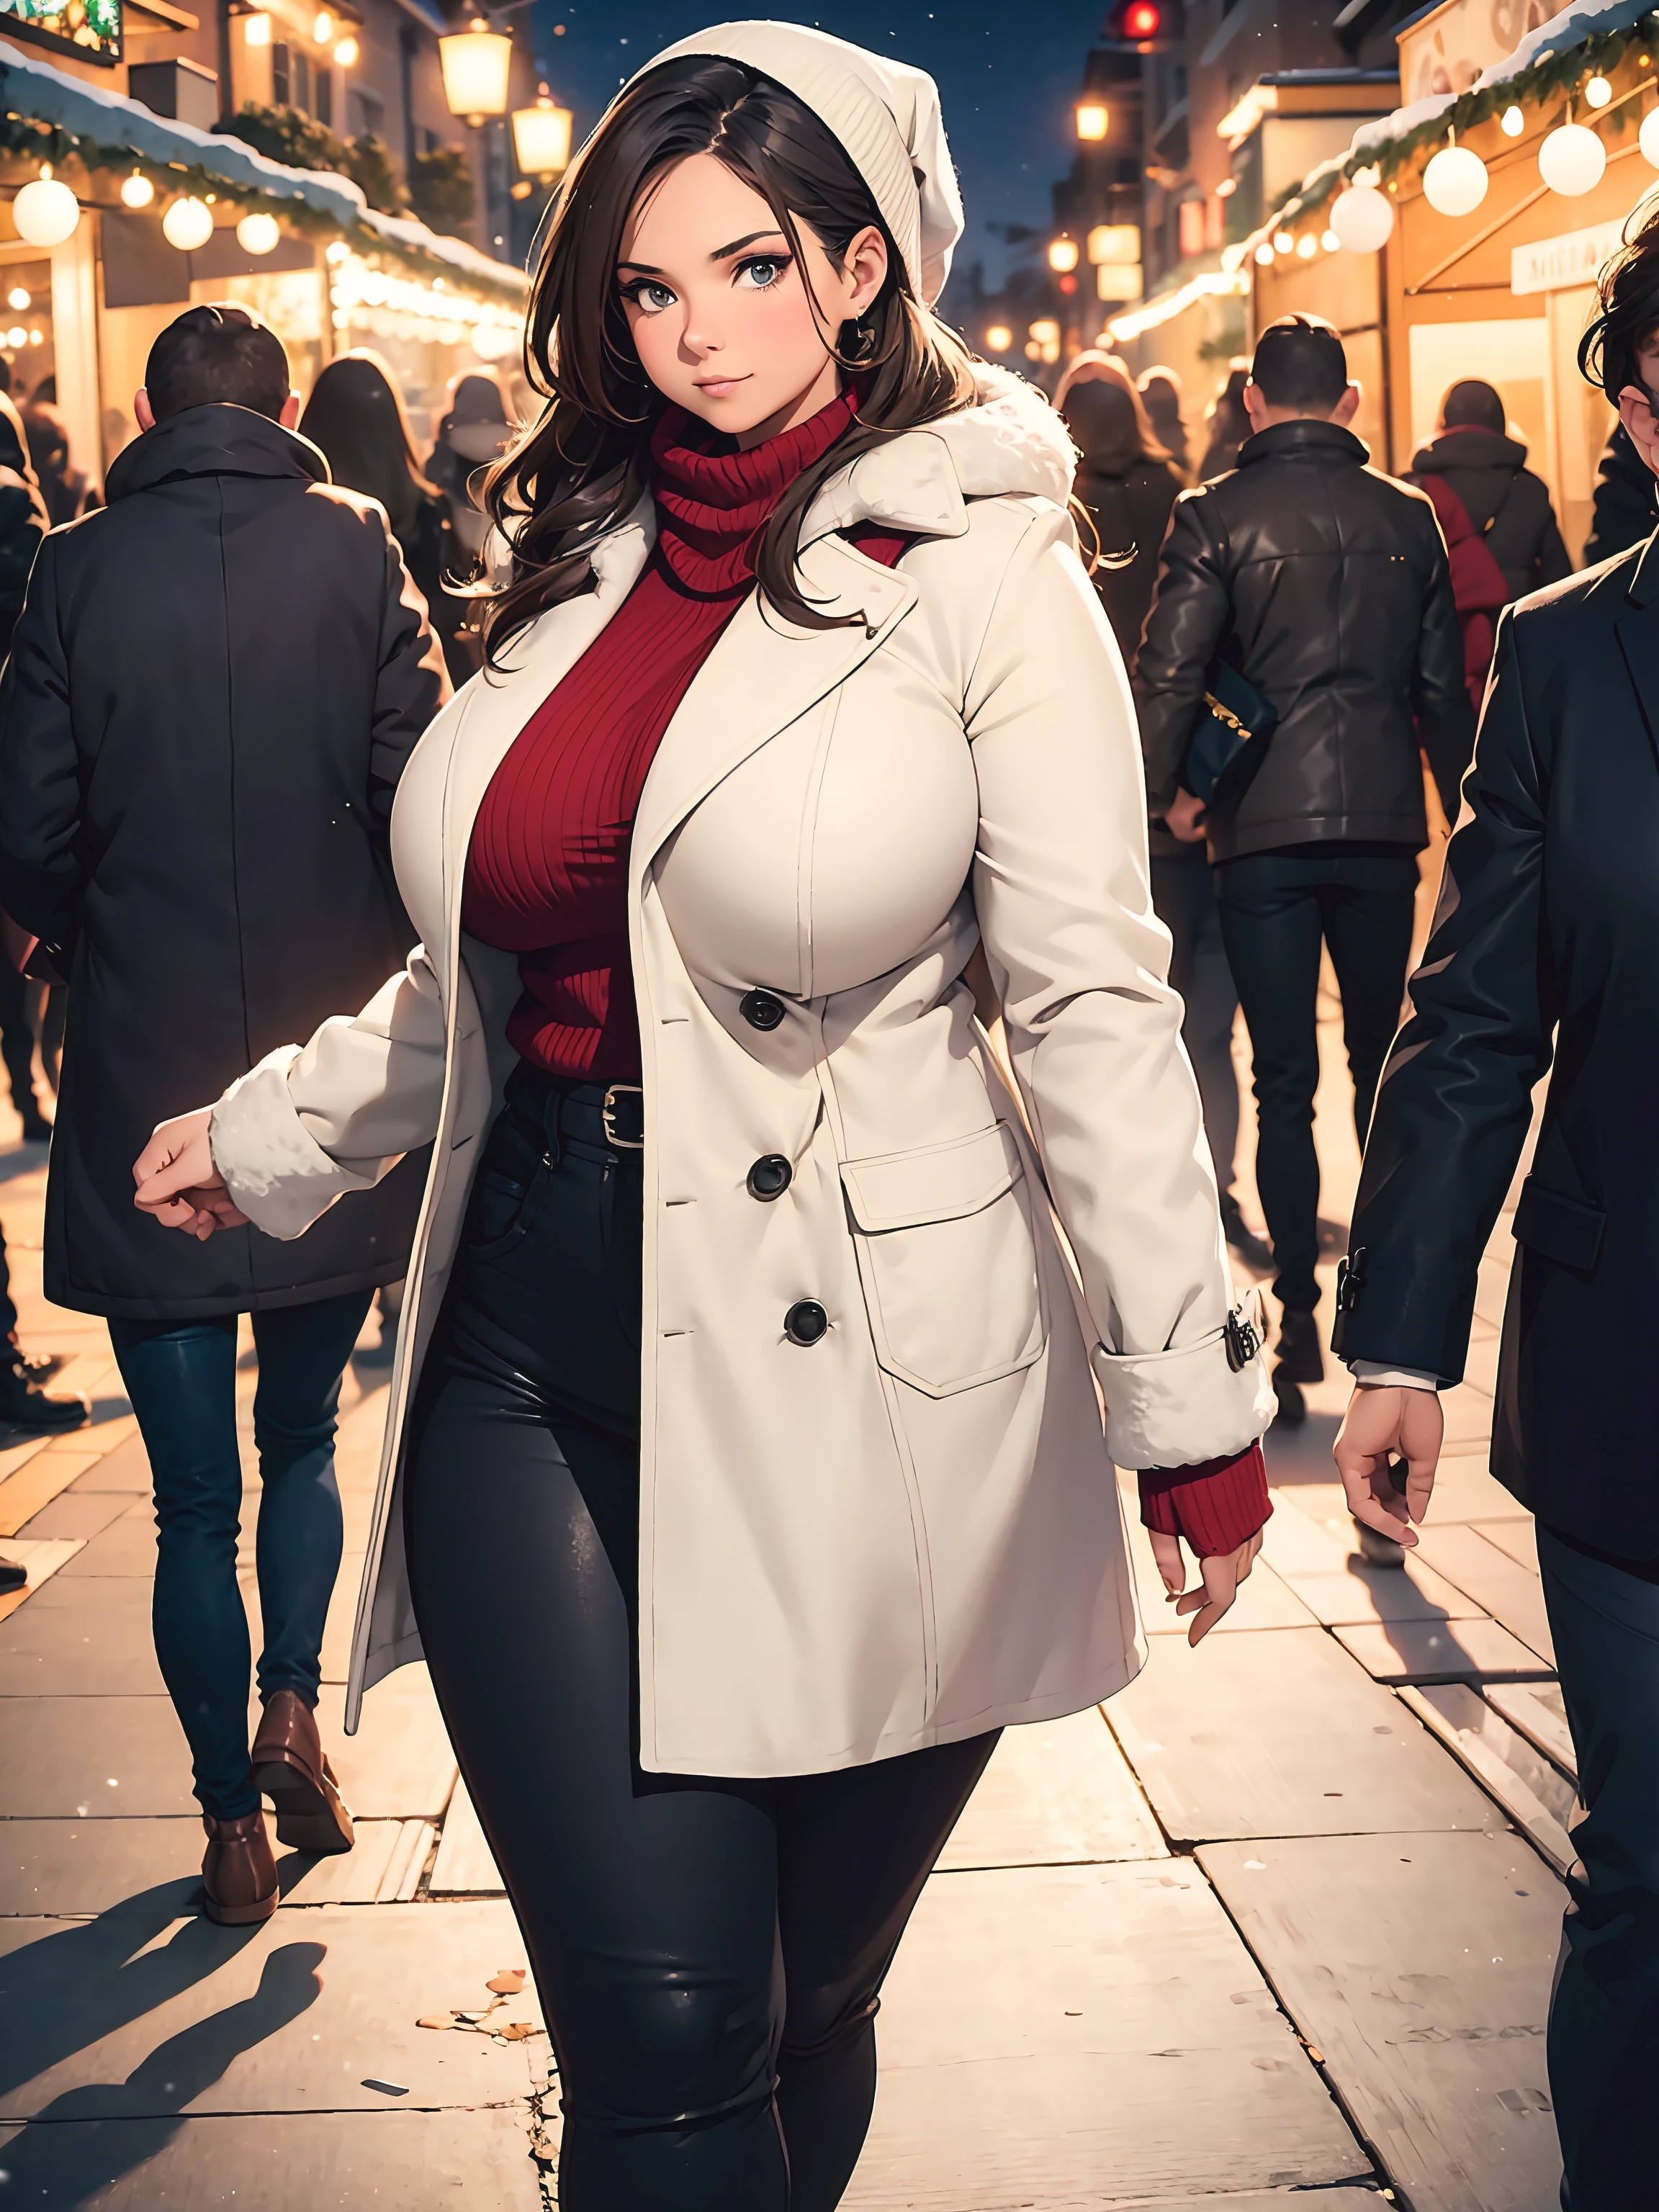 Night, winter, voluptuous woman with a curvy body, wearing a open winter coat, tight pants, walking away from a christmas market, looking aroused, bokeh, depth of field, low angle shot,